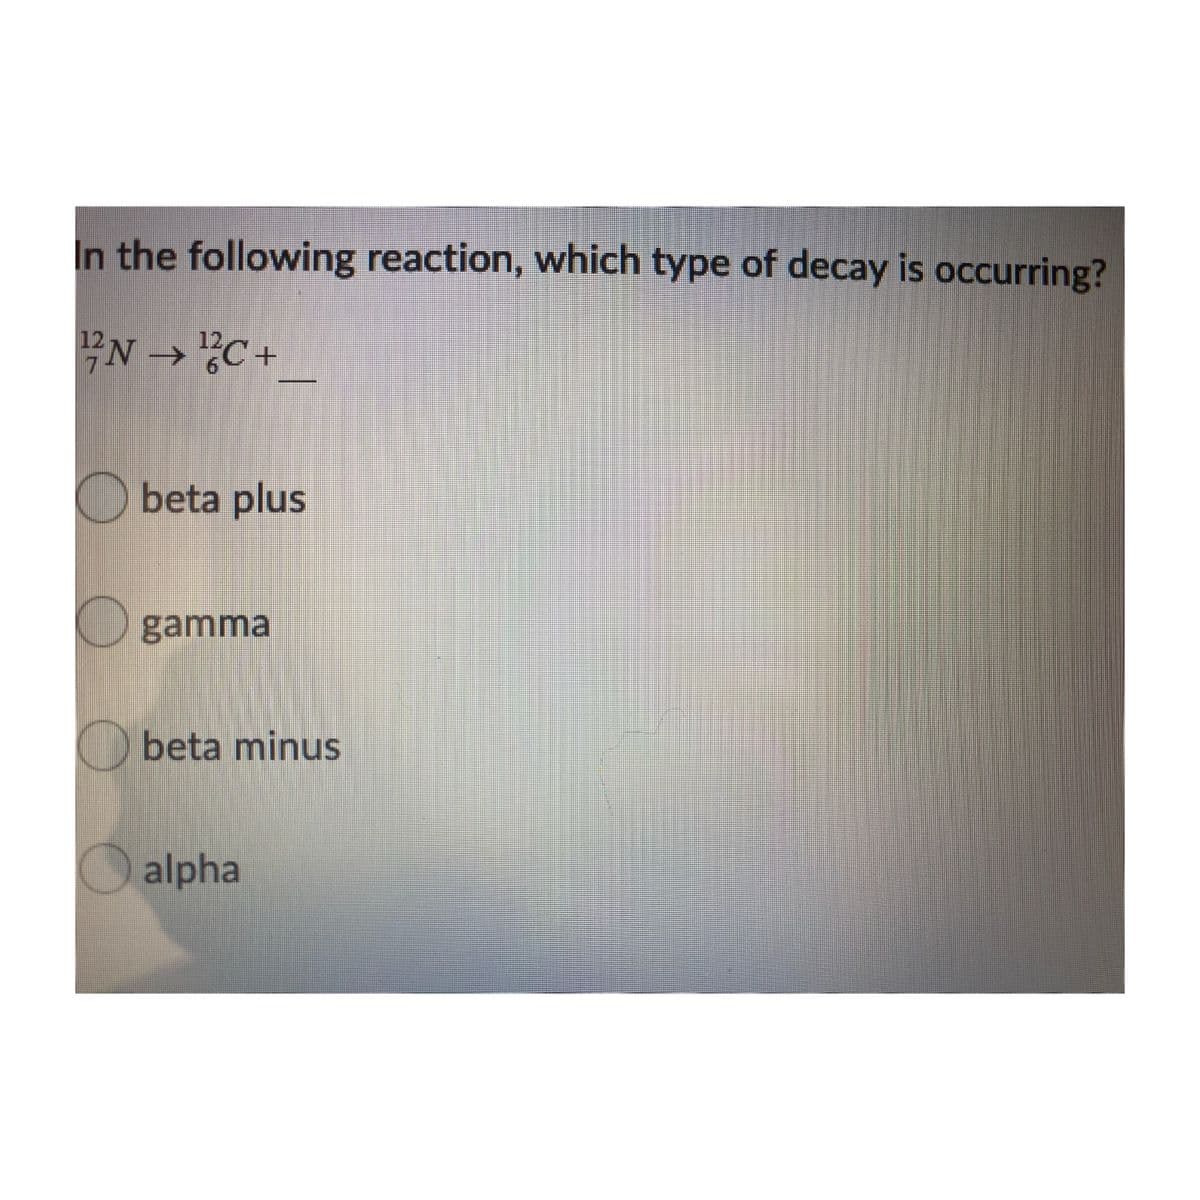 In the following reaction, which type of decay is occurring?
EN → C+
12N
12,
->
7.
beta plus
gamma
Obeta minus
alpha
